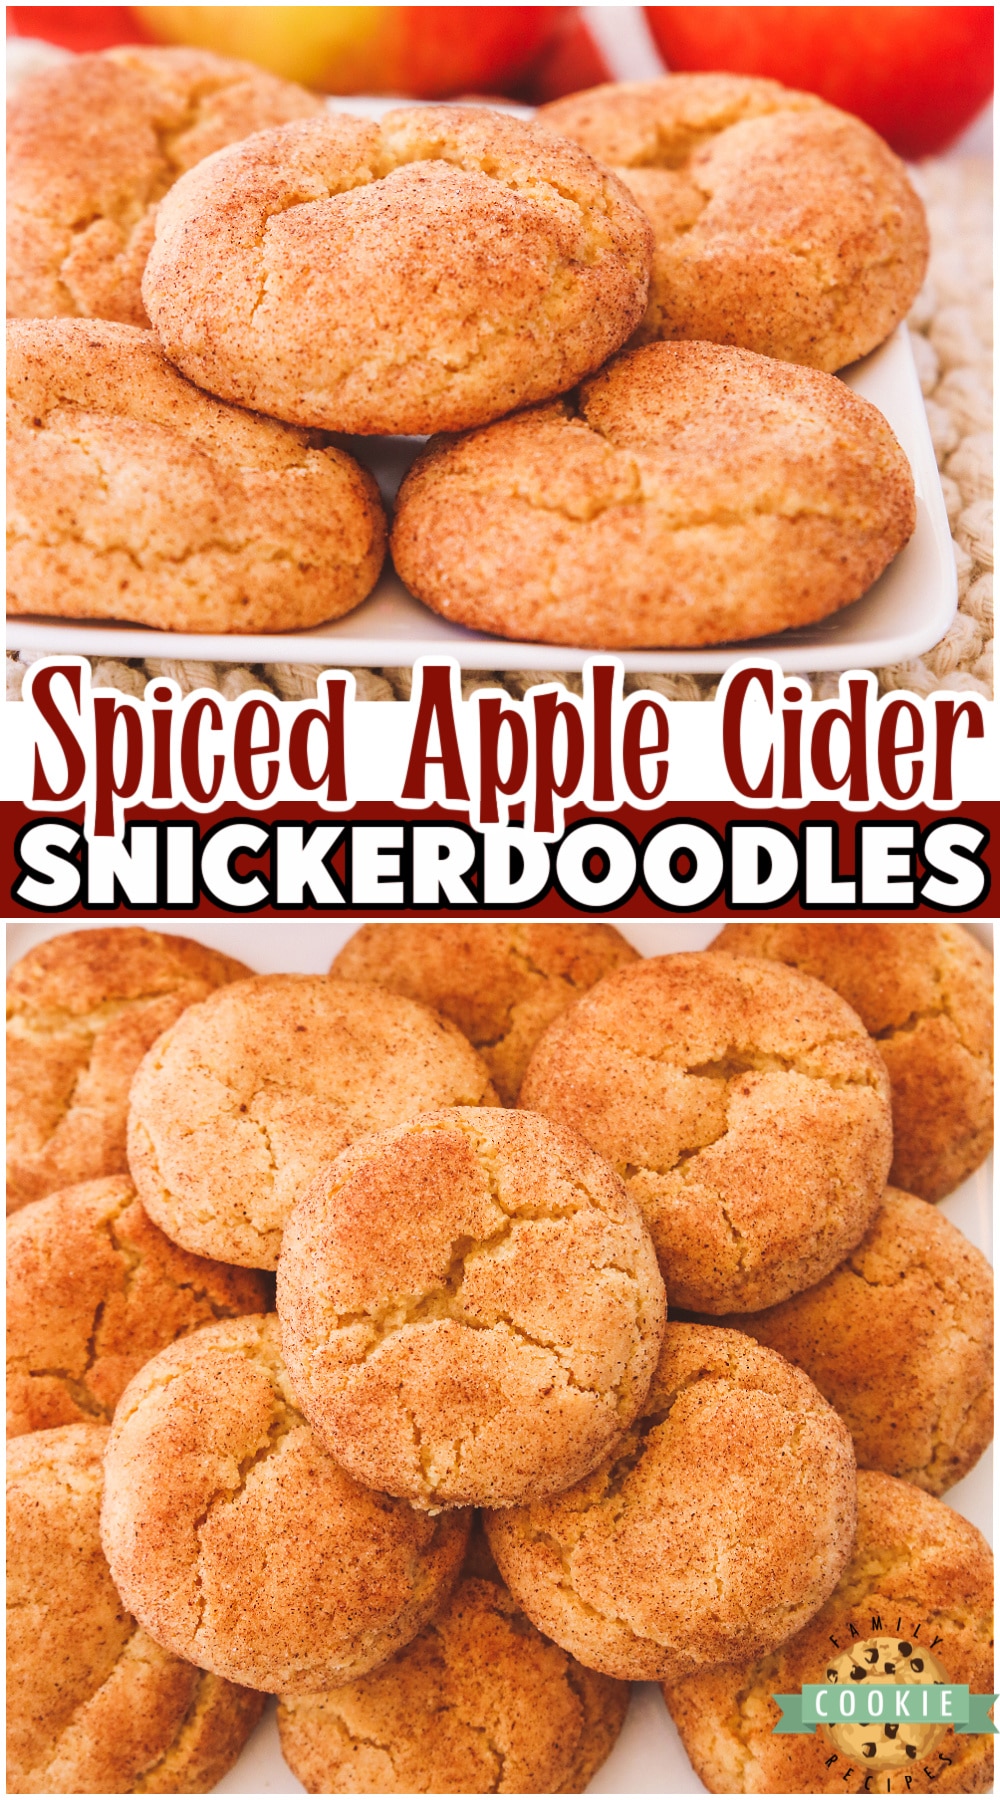 Apple Cider Snickerdoodles are everything you love about Snickerdoodles, with fresh & tangy apple cider! Fabulous Fall flavors in this apple cinnamon spiced snickerdoodle recipe. 